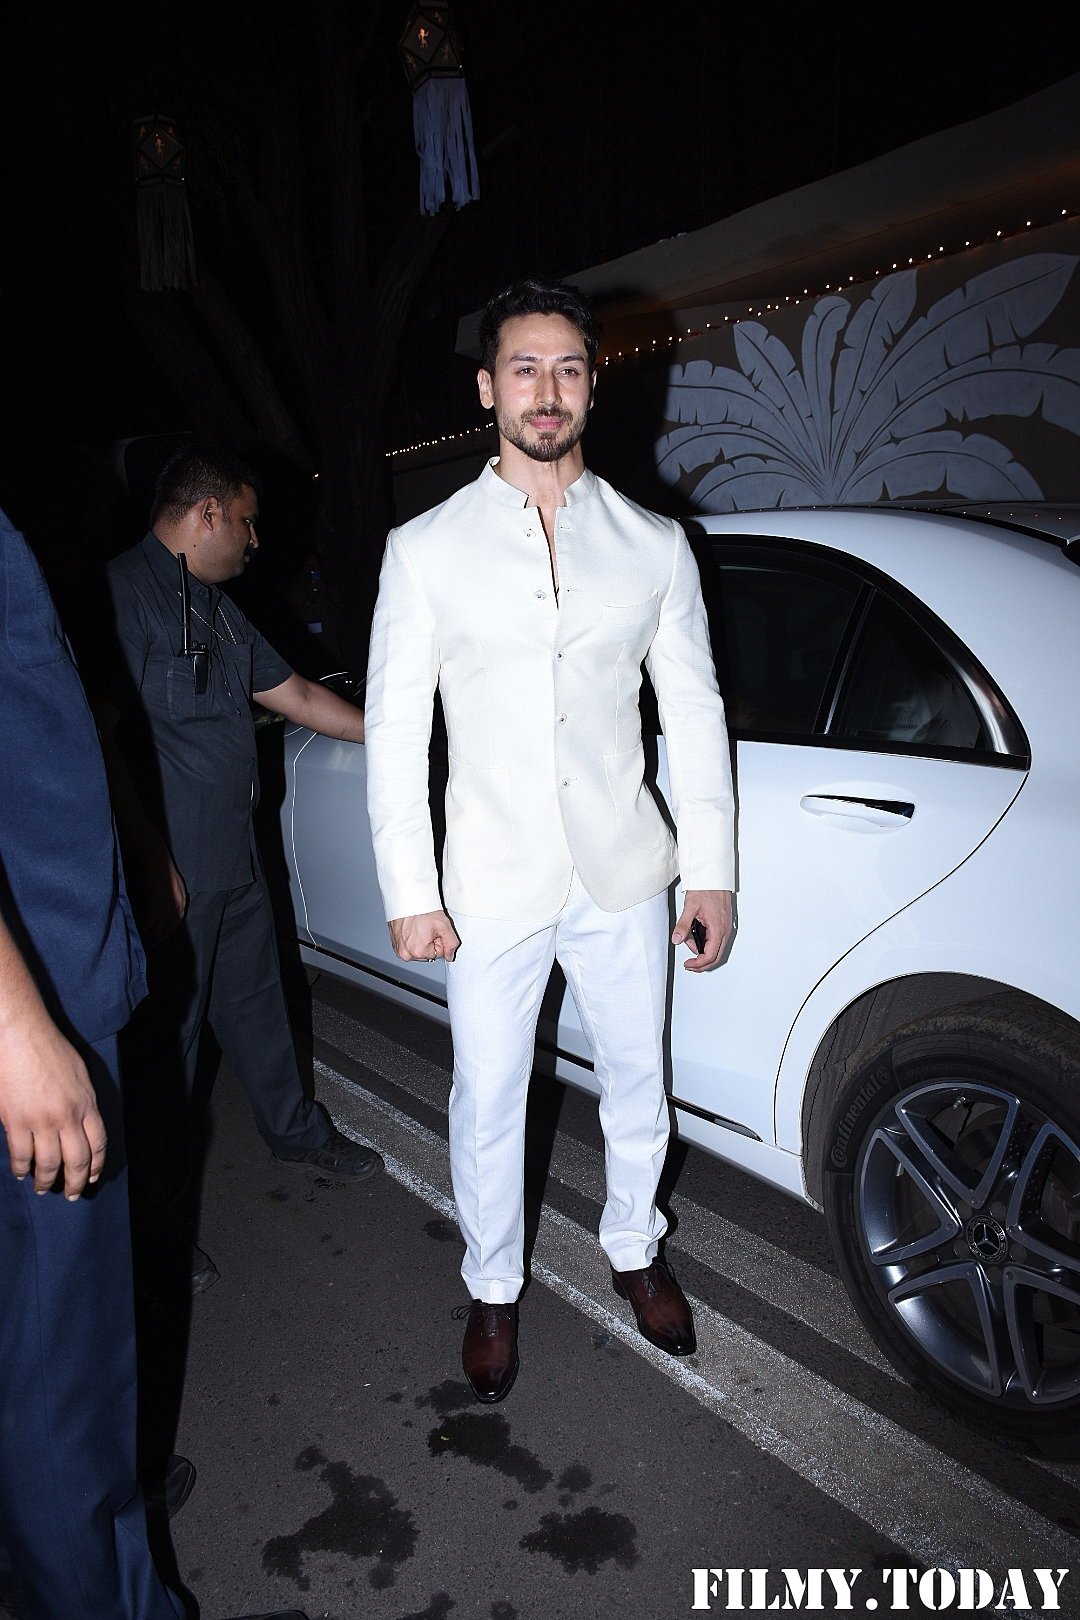 Tiger Shroff - Photos: Celebs At Amitabh Bachchan's Diwali Party In Juhu | Picture 1694761